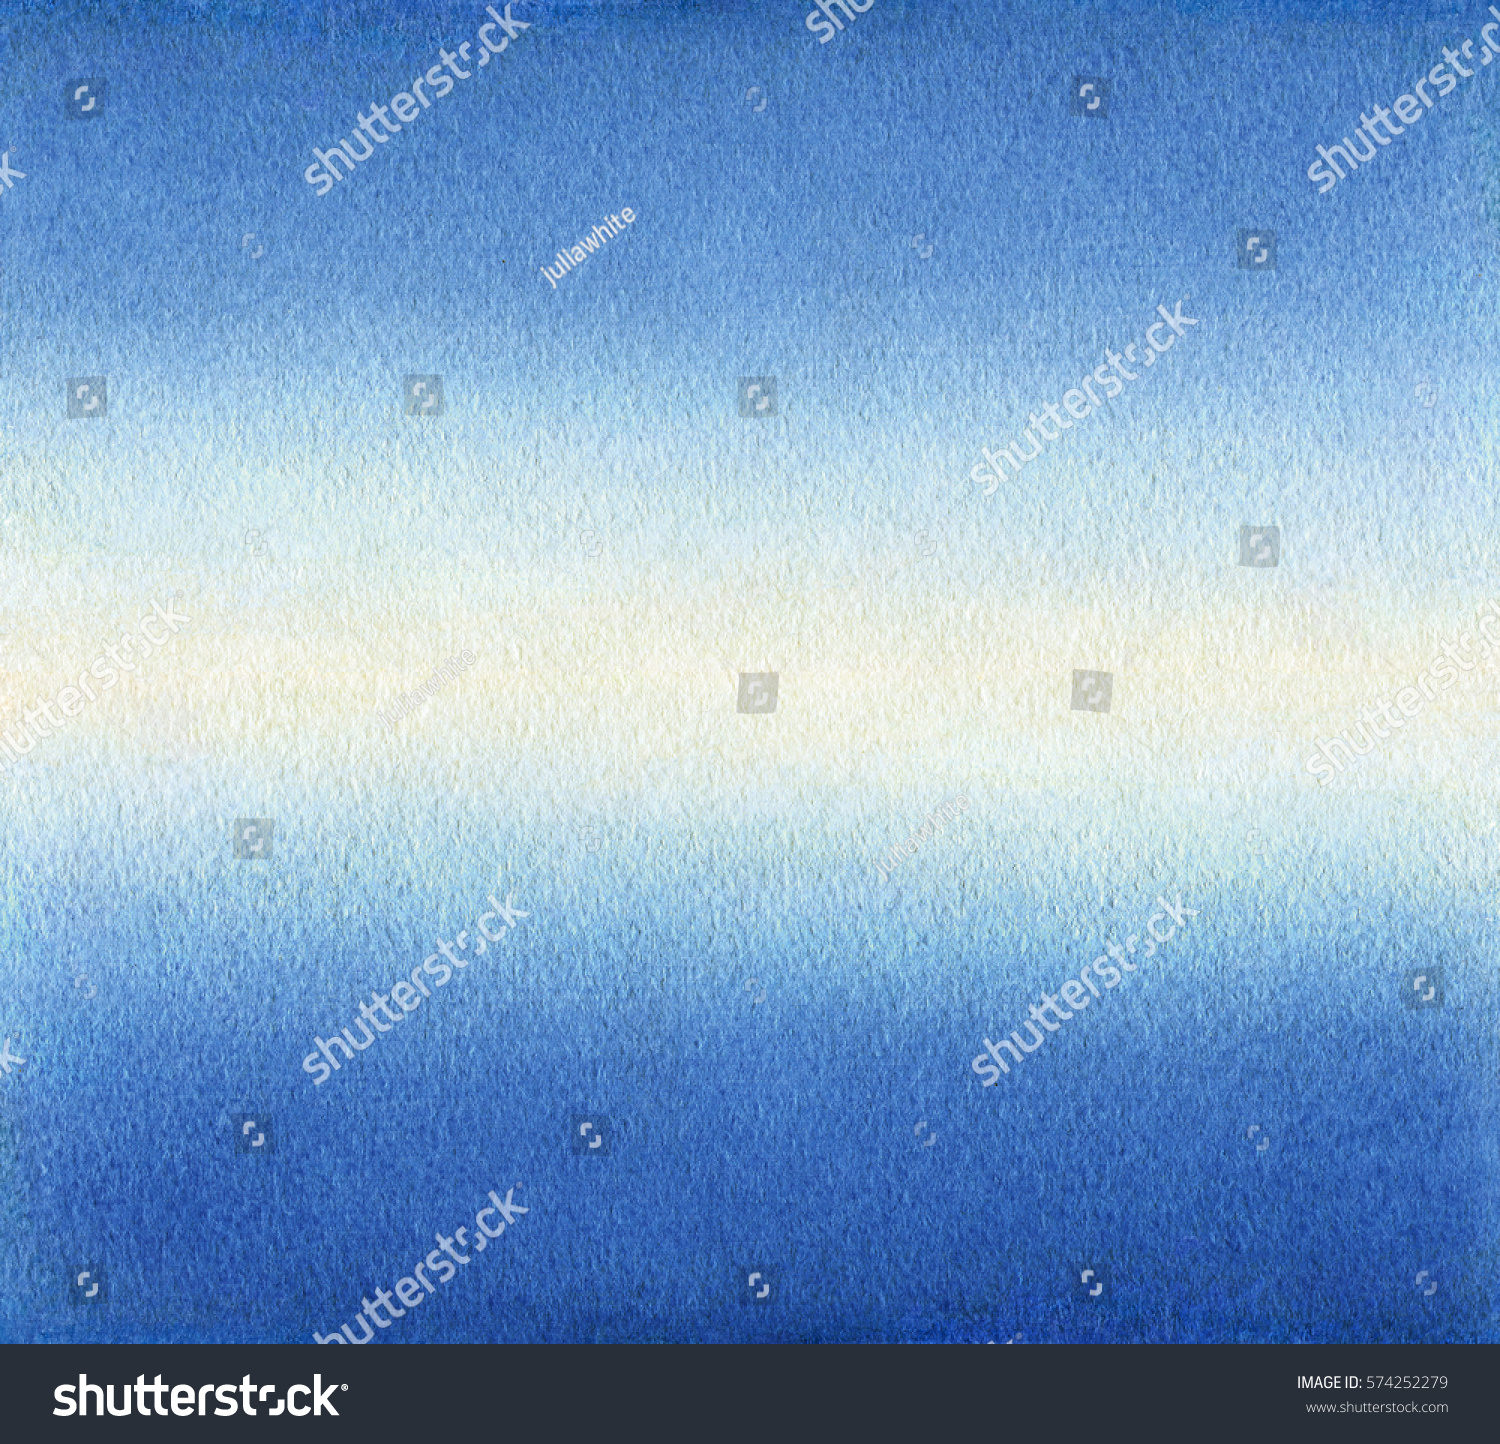 Watercolor Background Sky Reflection Without Explicit Stock ...